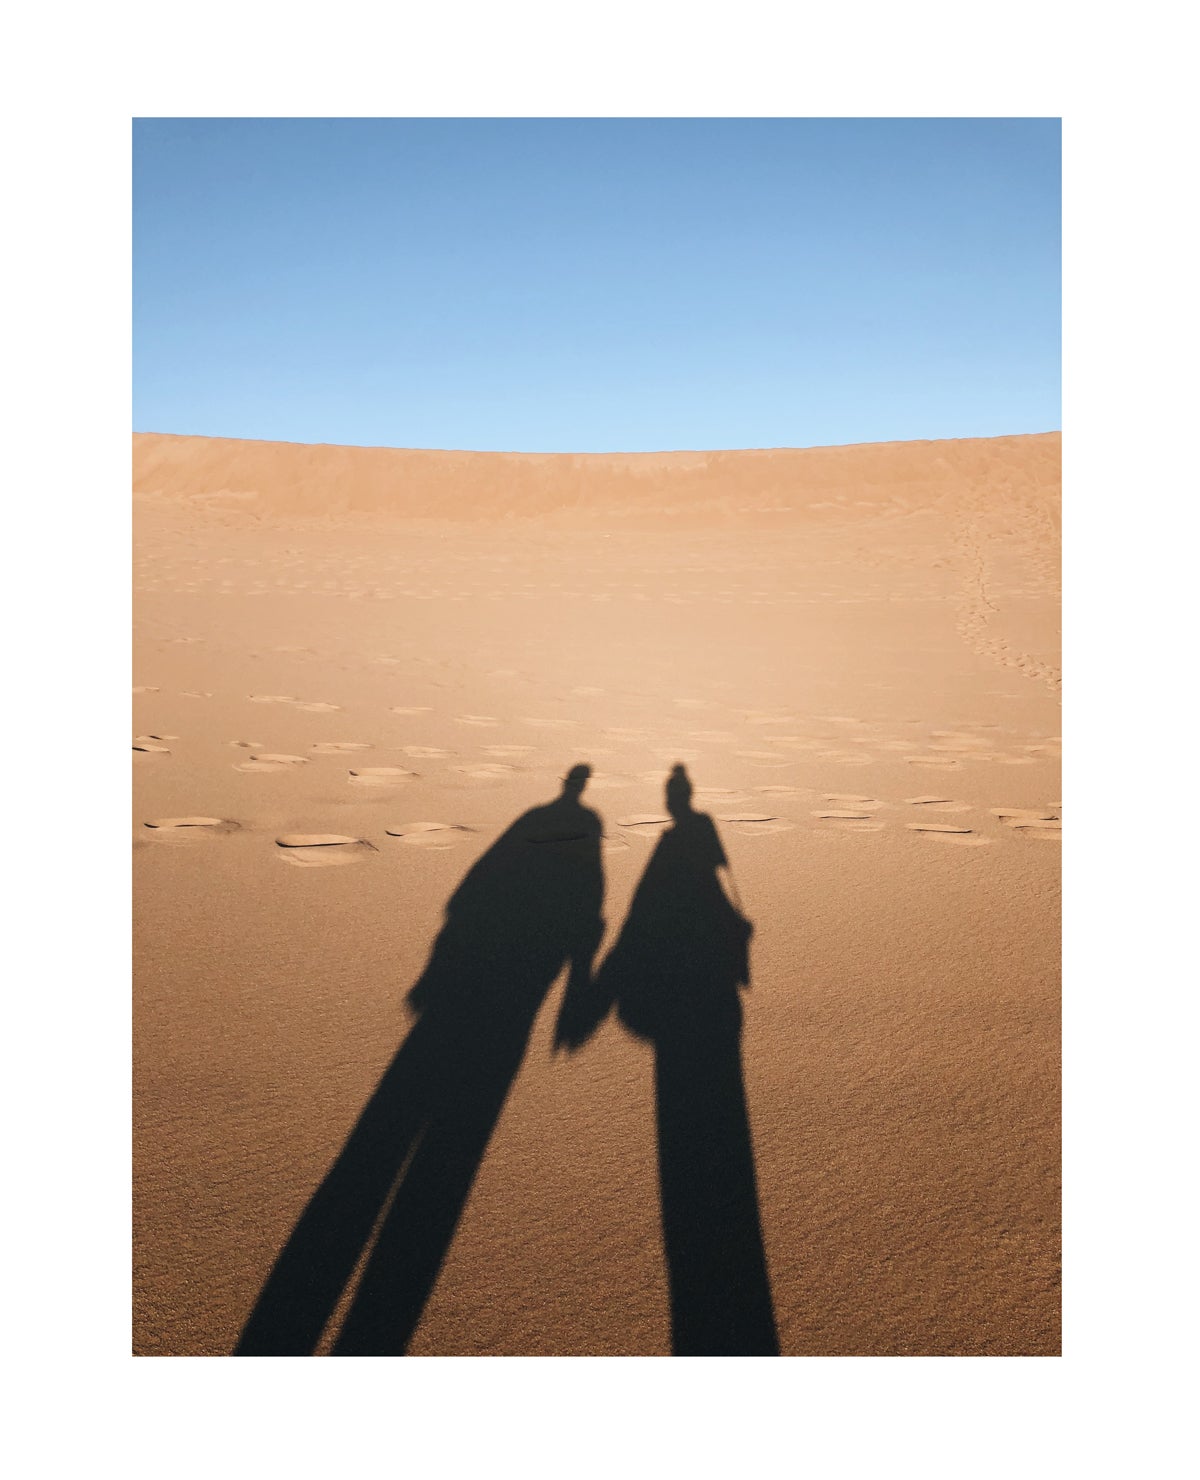 Photo of couple casting shadow onto desert sands by Molly Olwig